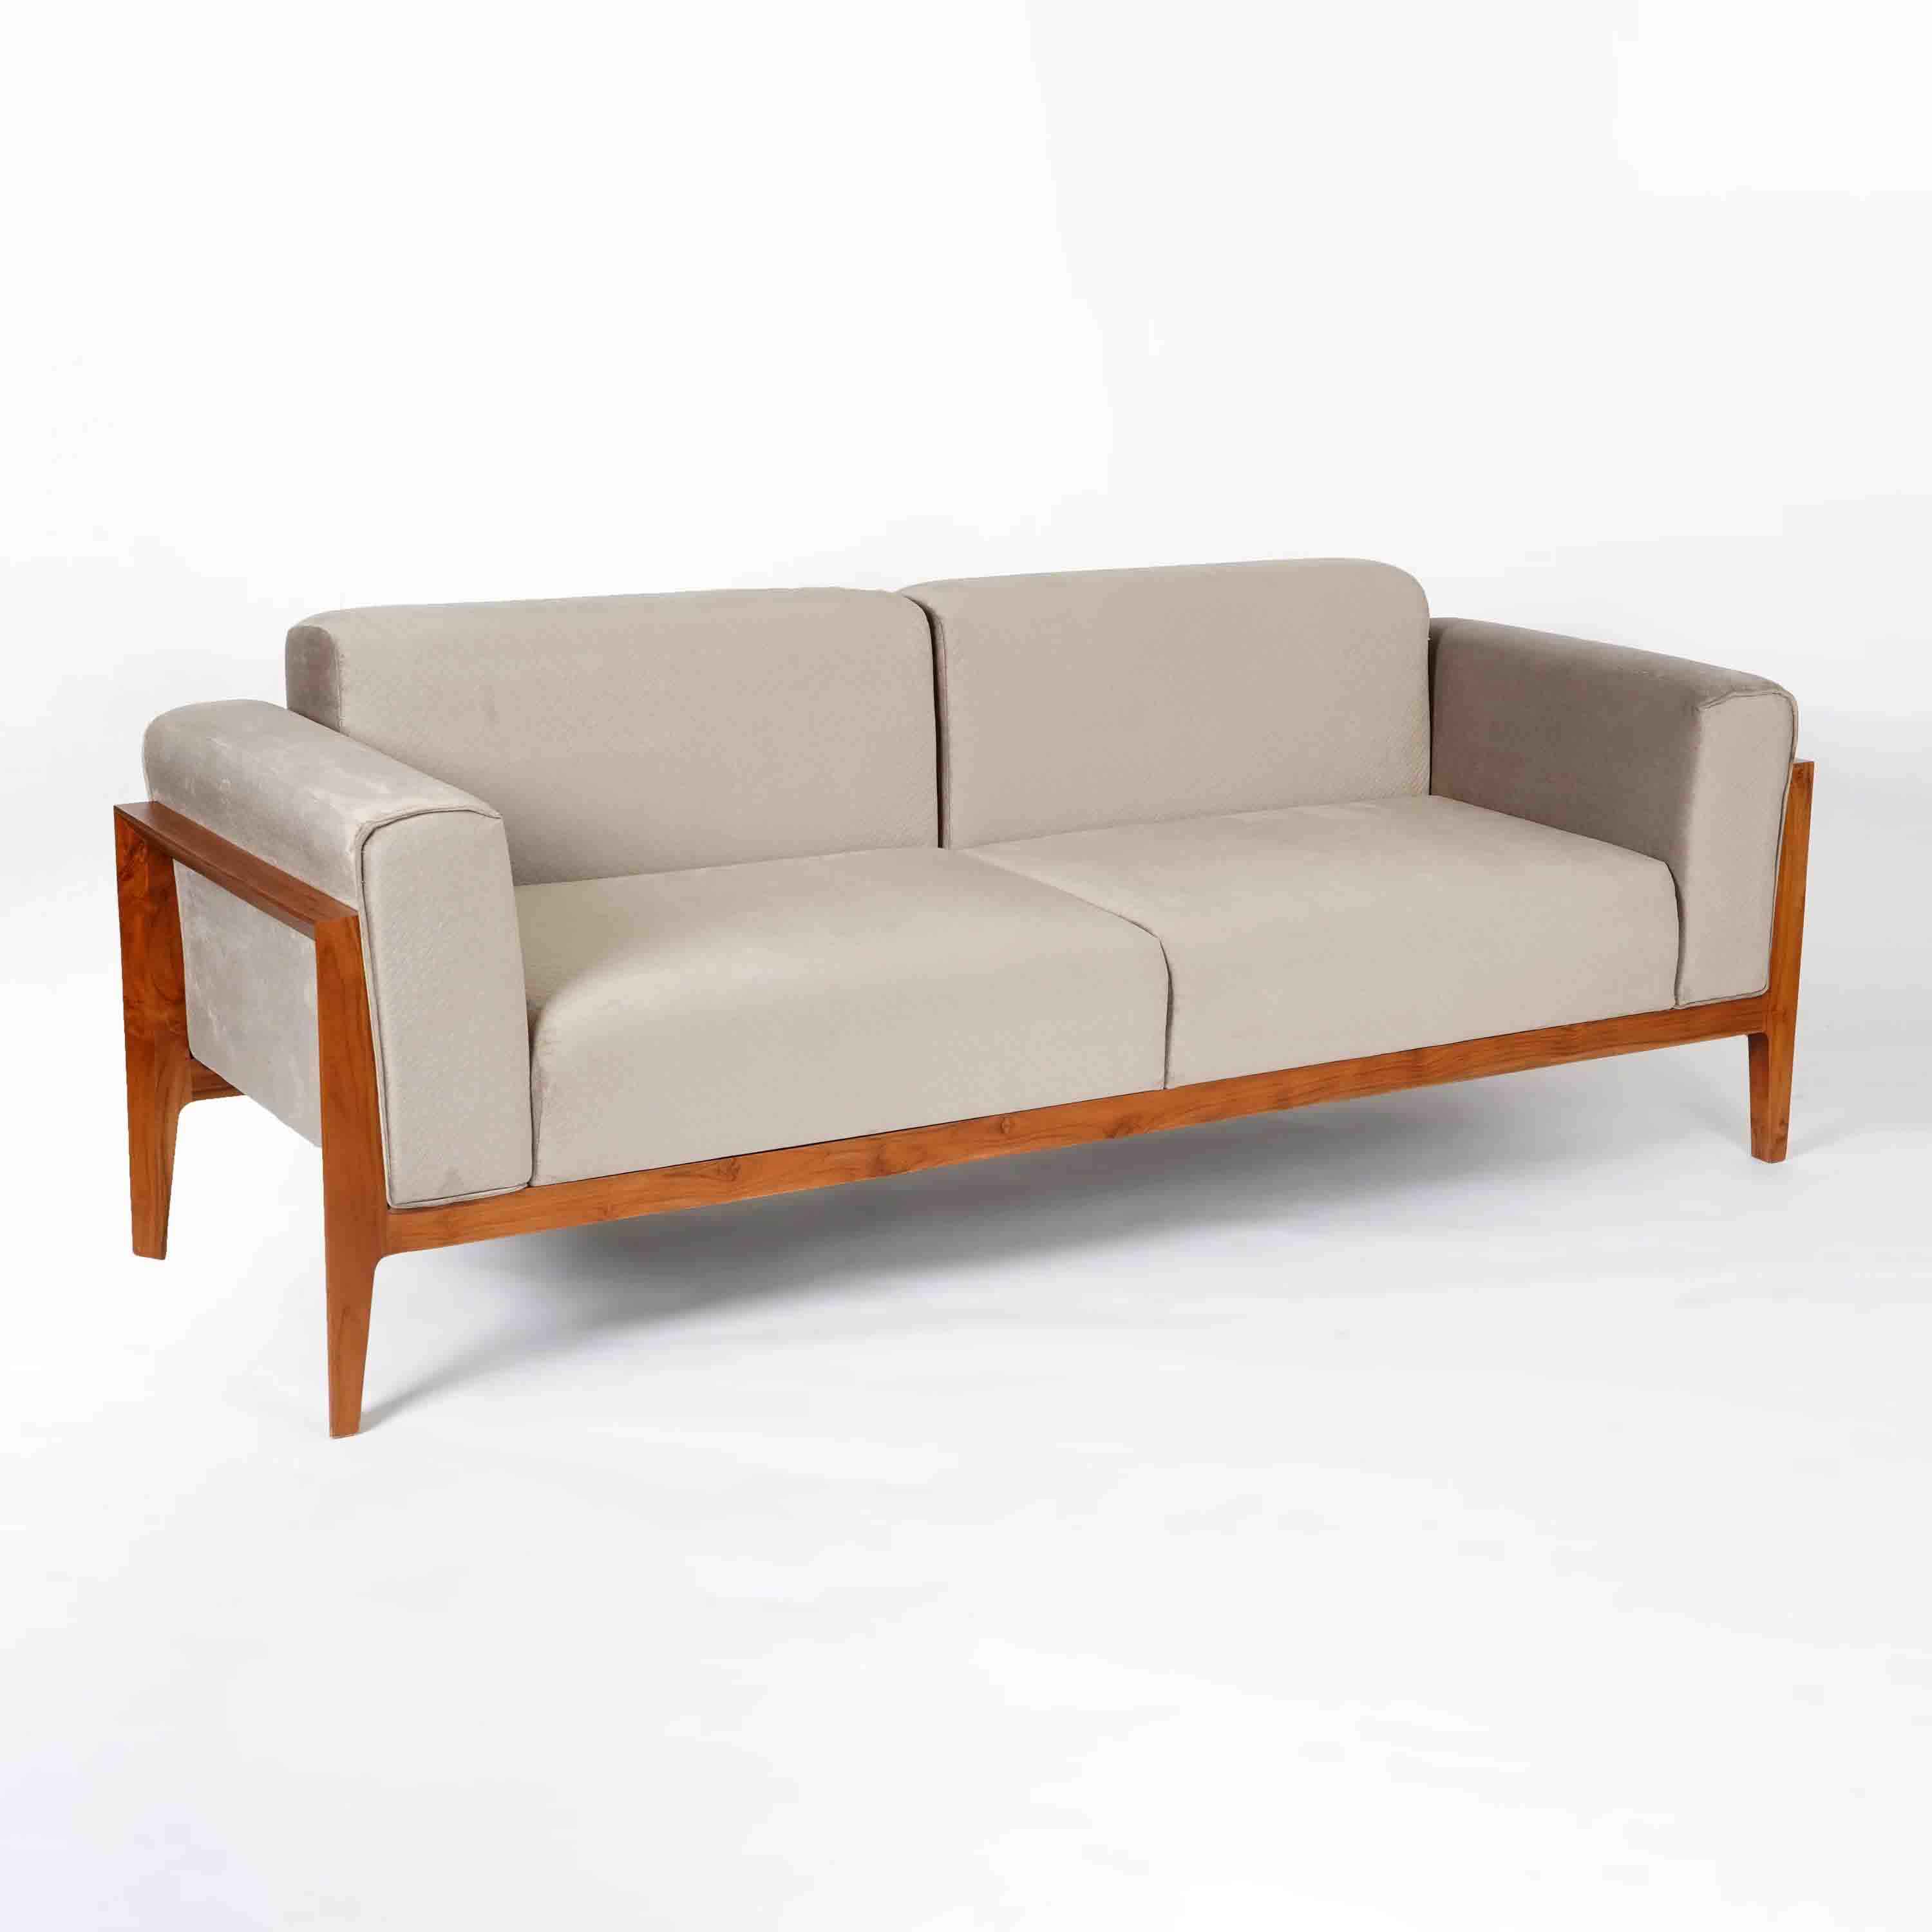 Adams Chaise Sectional Sofa With Ottoman